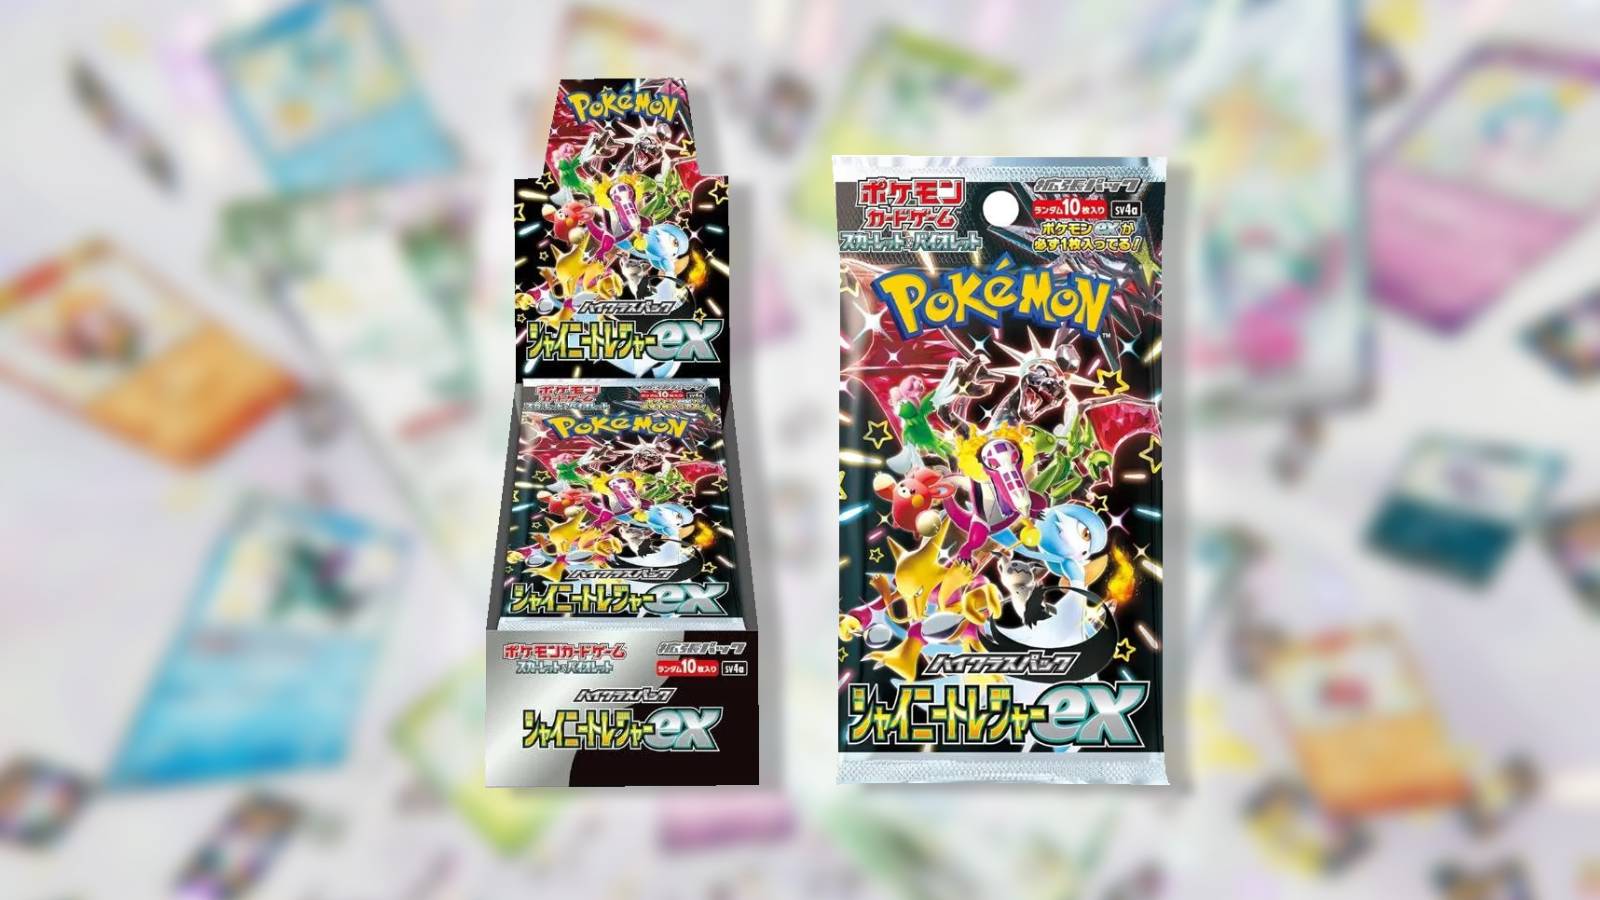 The Pokemon TCG Shiny Treasures ex Booster Box appears against a blurred background